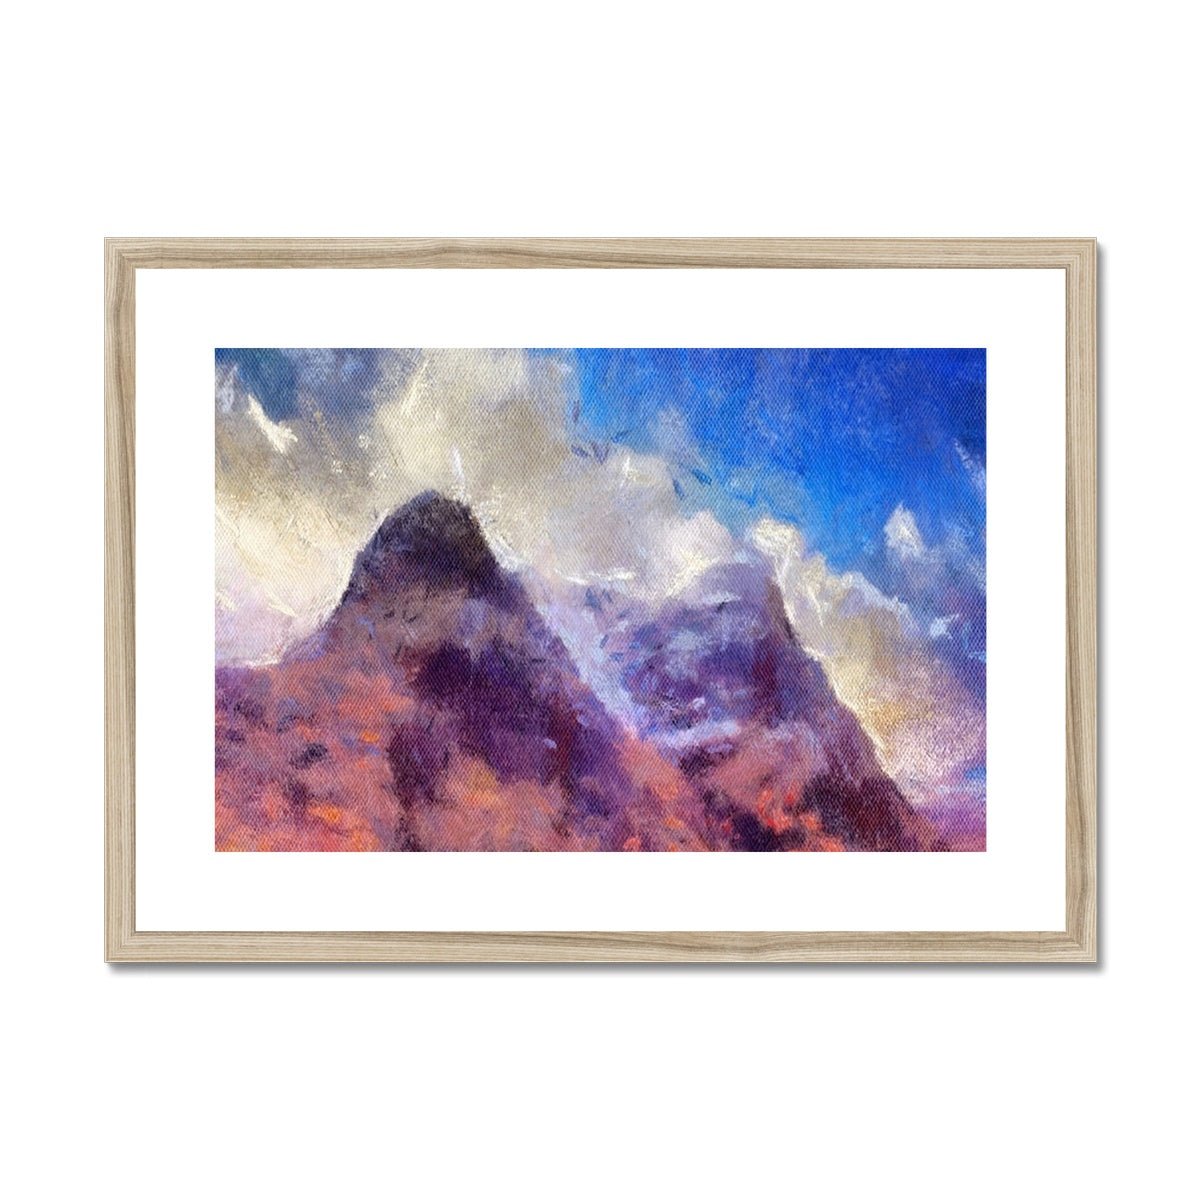 Glencoe Painting | Framed & Mounted Prints From Scotland-Framed & Mounted Prints-Glencoe Art Gallery-A2 Landscape-Natural Frame-Paintings, Prints, Homeware, Art Gifts From Scotland By Scottish Artist Kevin Hunter